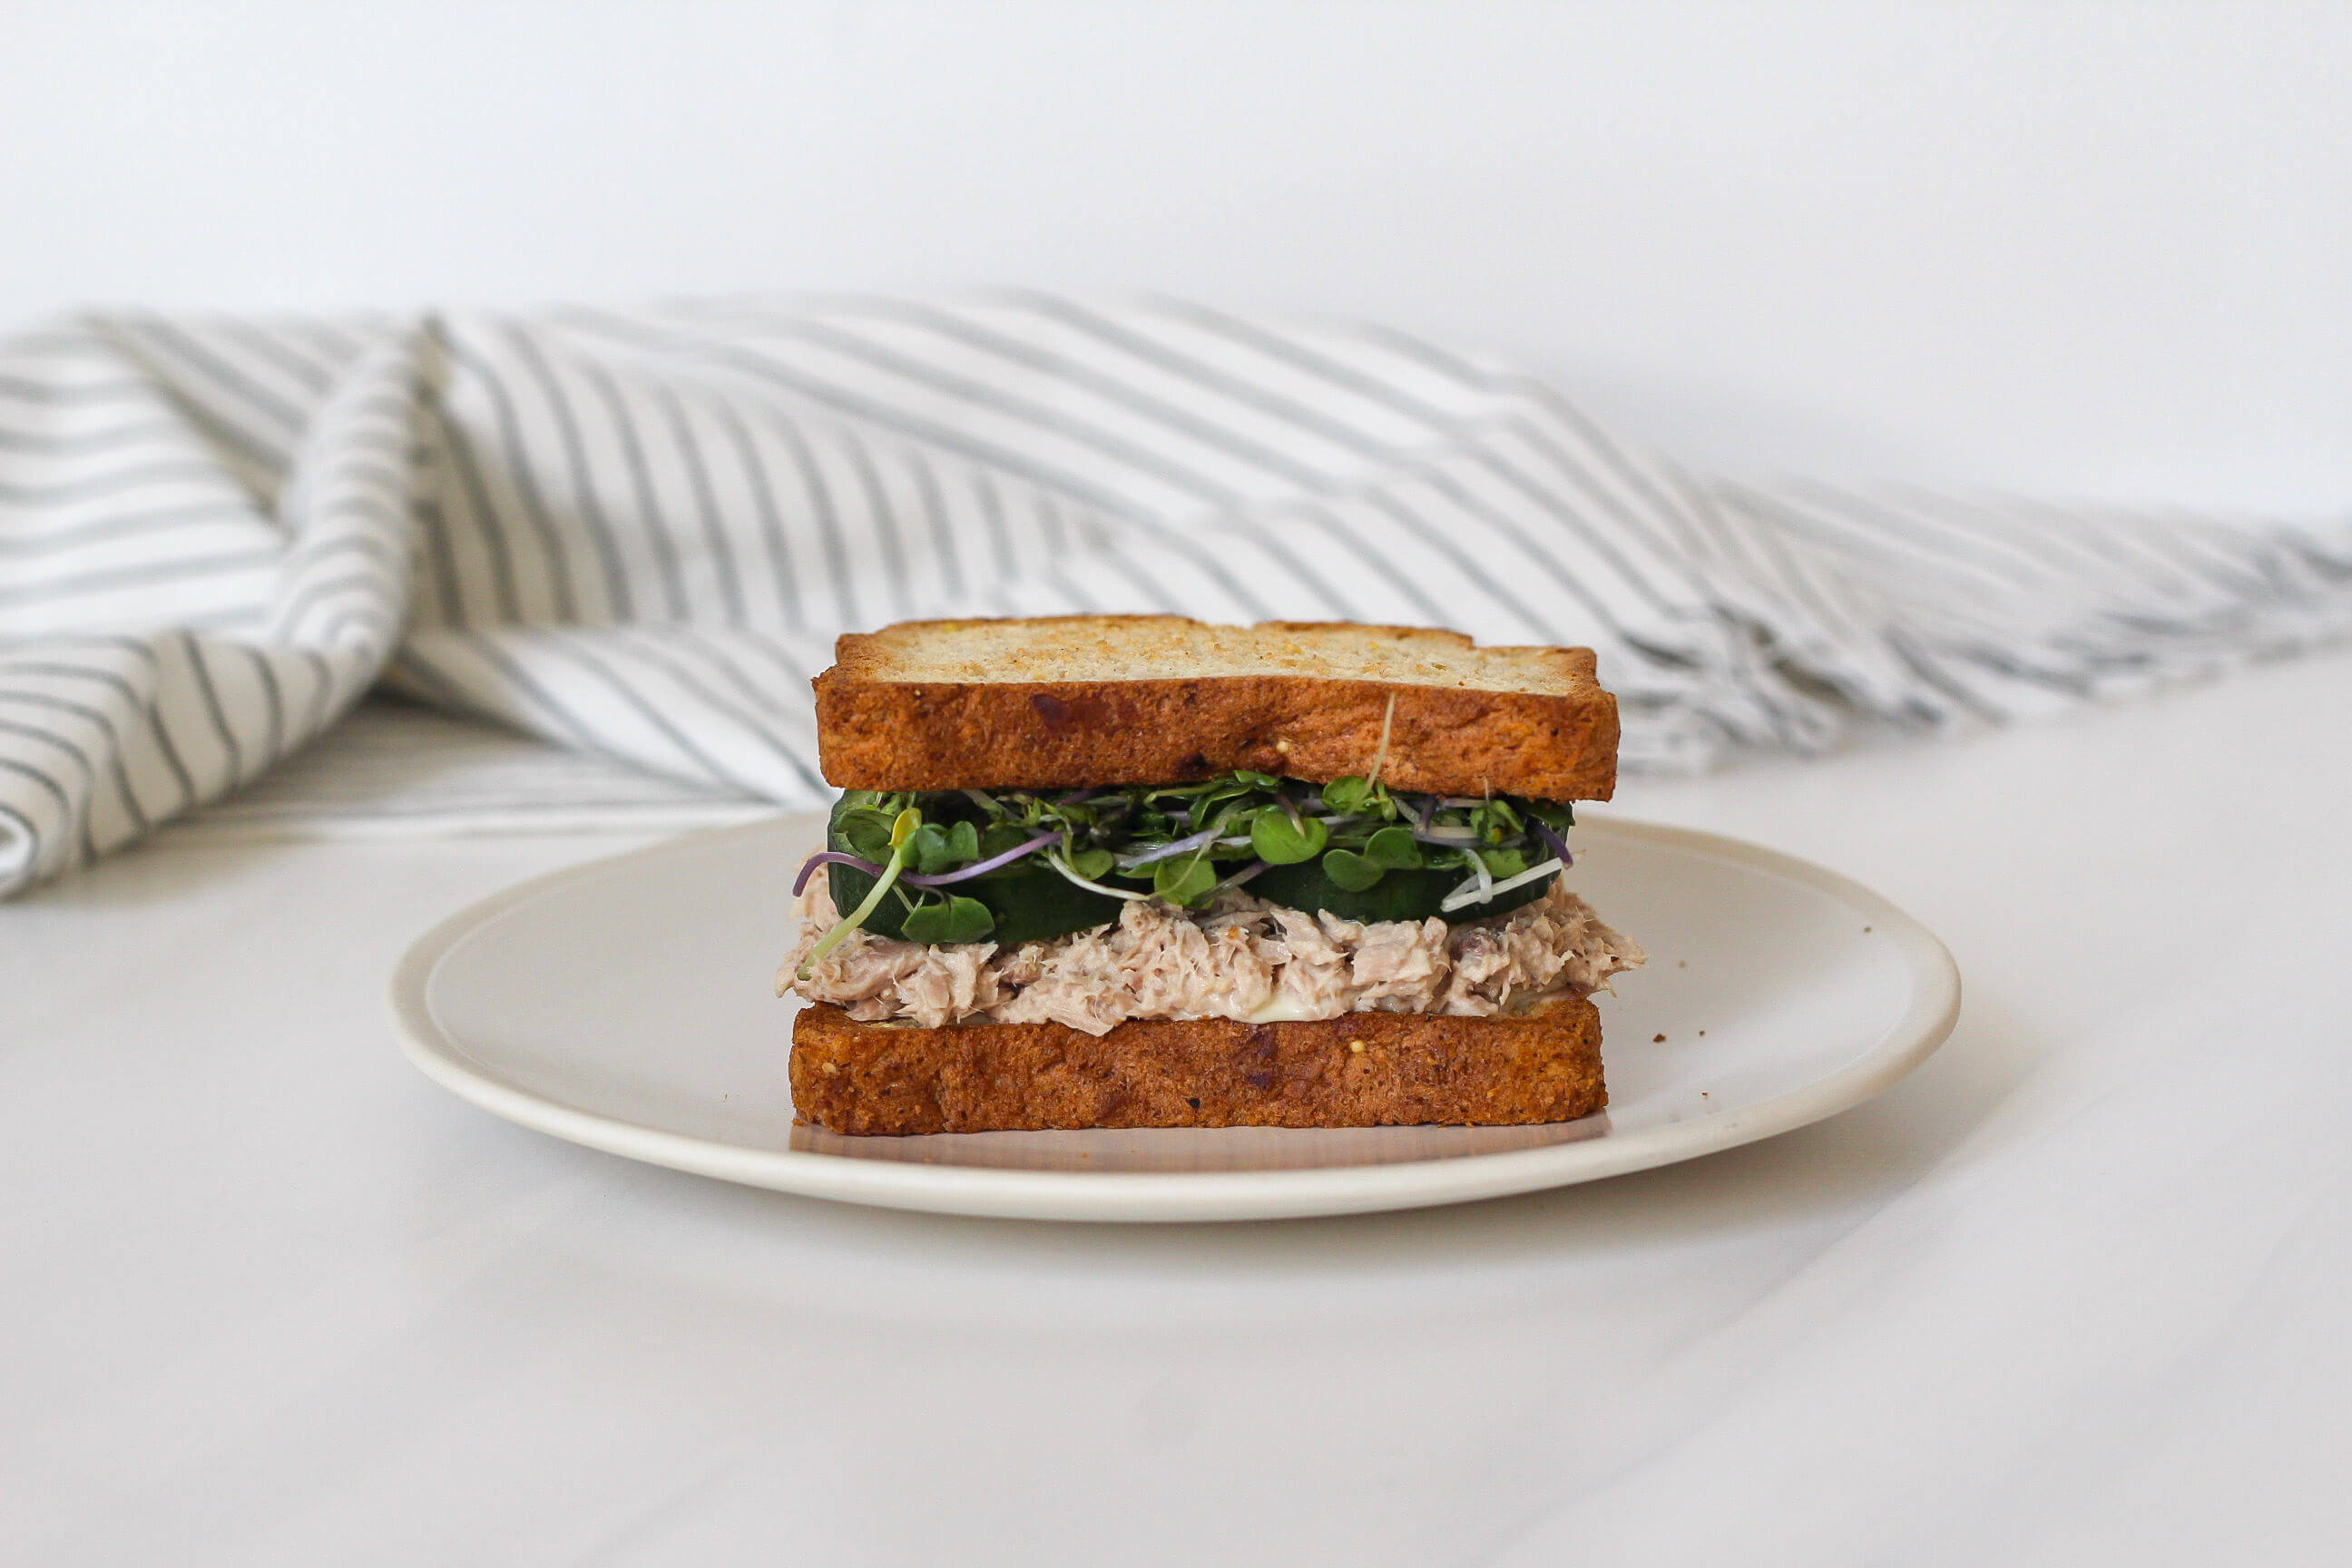 20 Family-Friendly Meals Your Clients Will Love: Tuna & Cucumber Sandwich